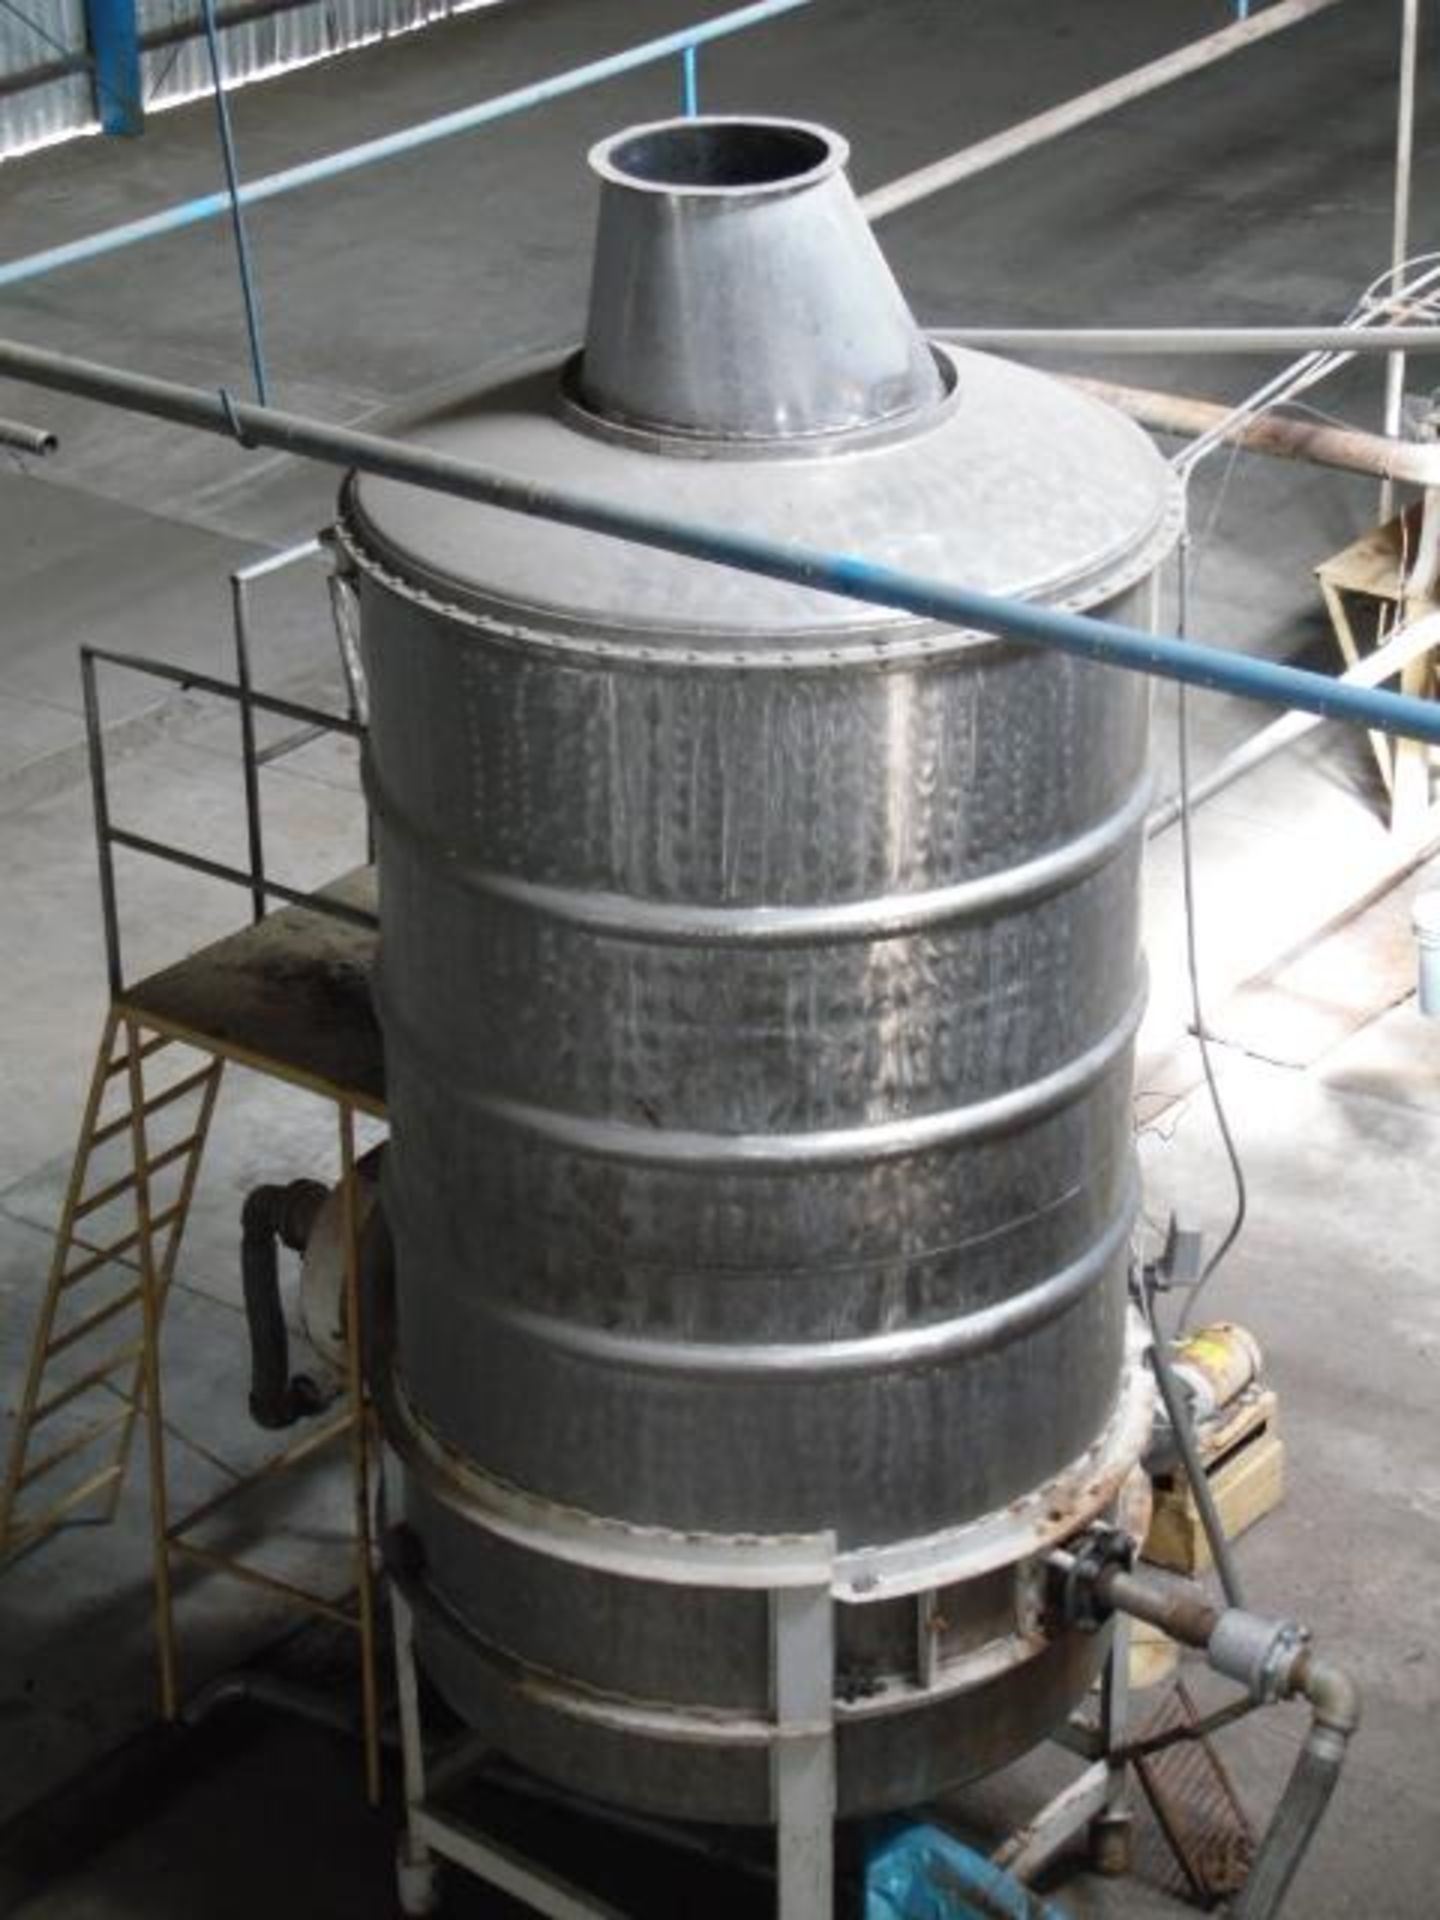 Stainless steel rotary coil hot break tank (Tanque de acero inoxidable con serpentin rotatorio) - Image 4 of 5